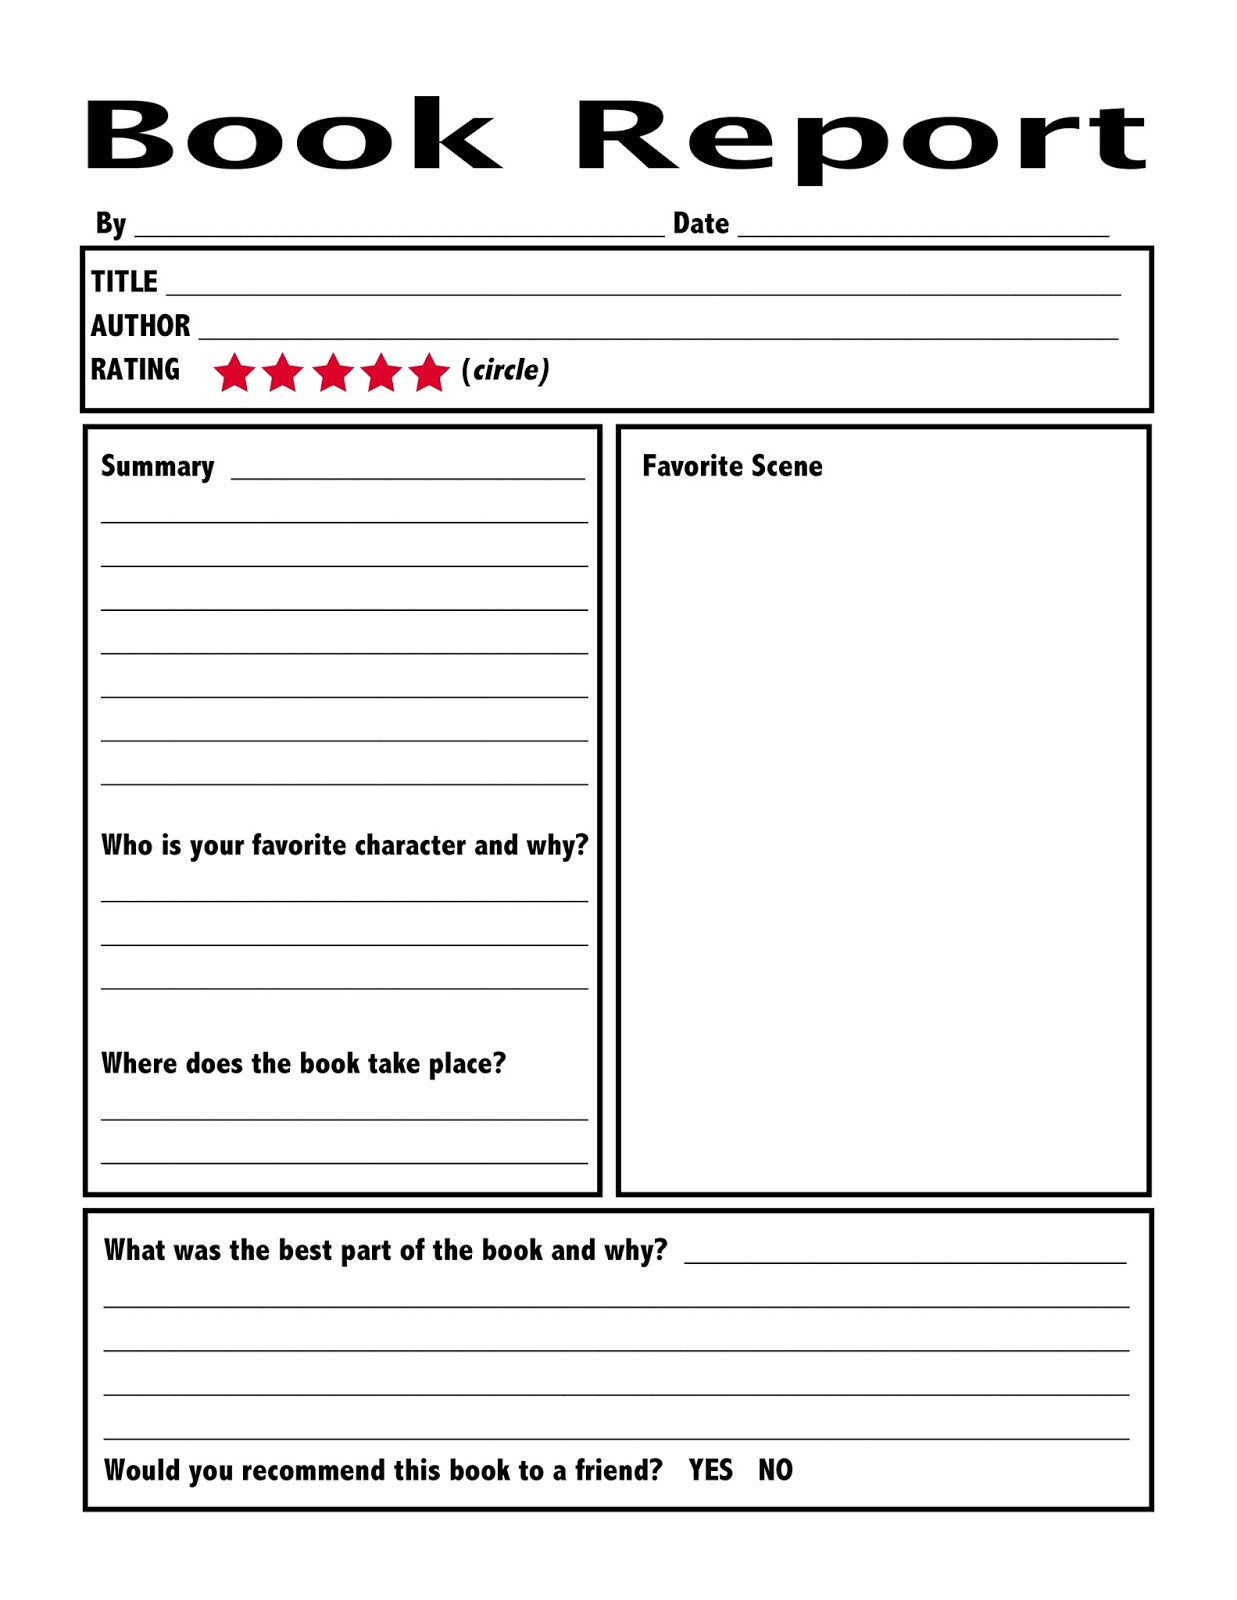 Template On How To Write A Report